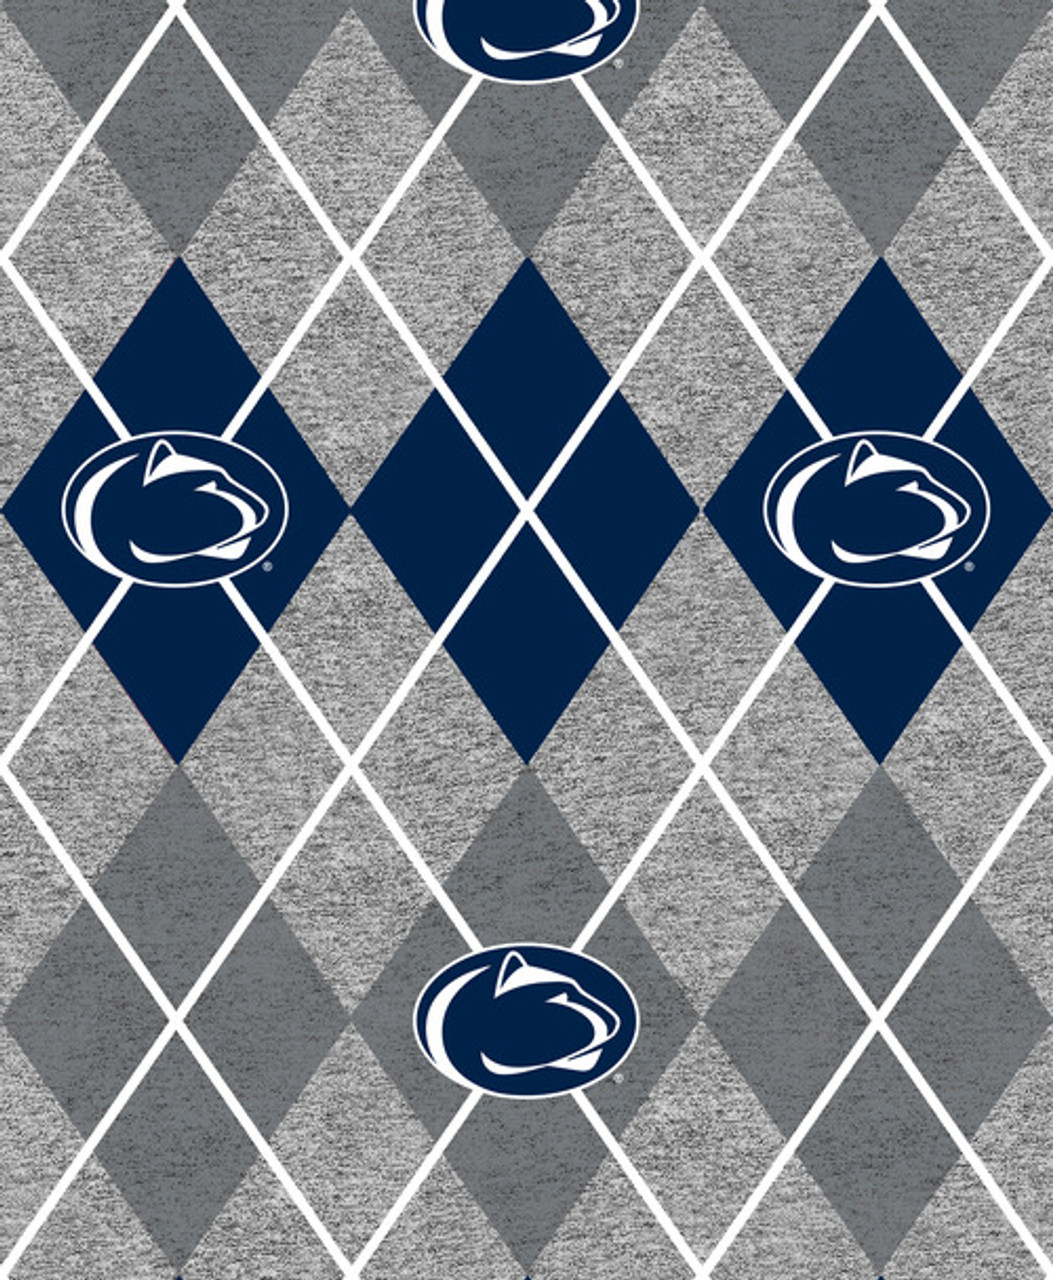 Penn State Nittany Lions Heather Argyle Fleece Fabric Remnants